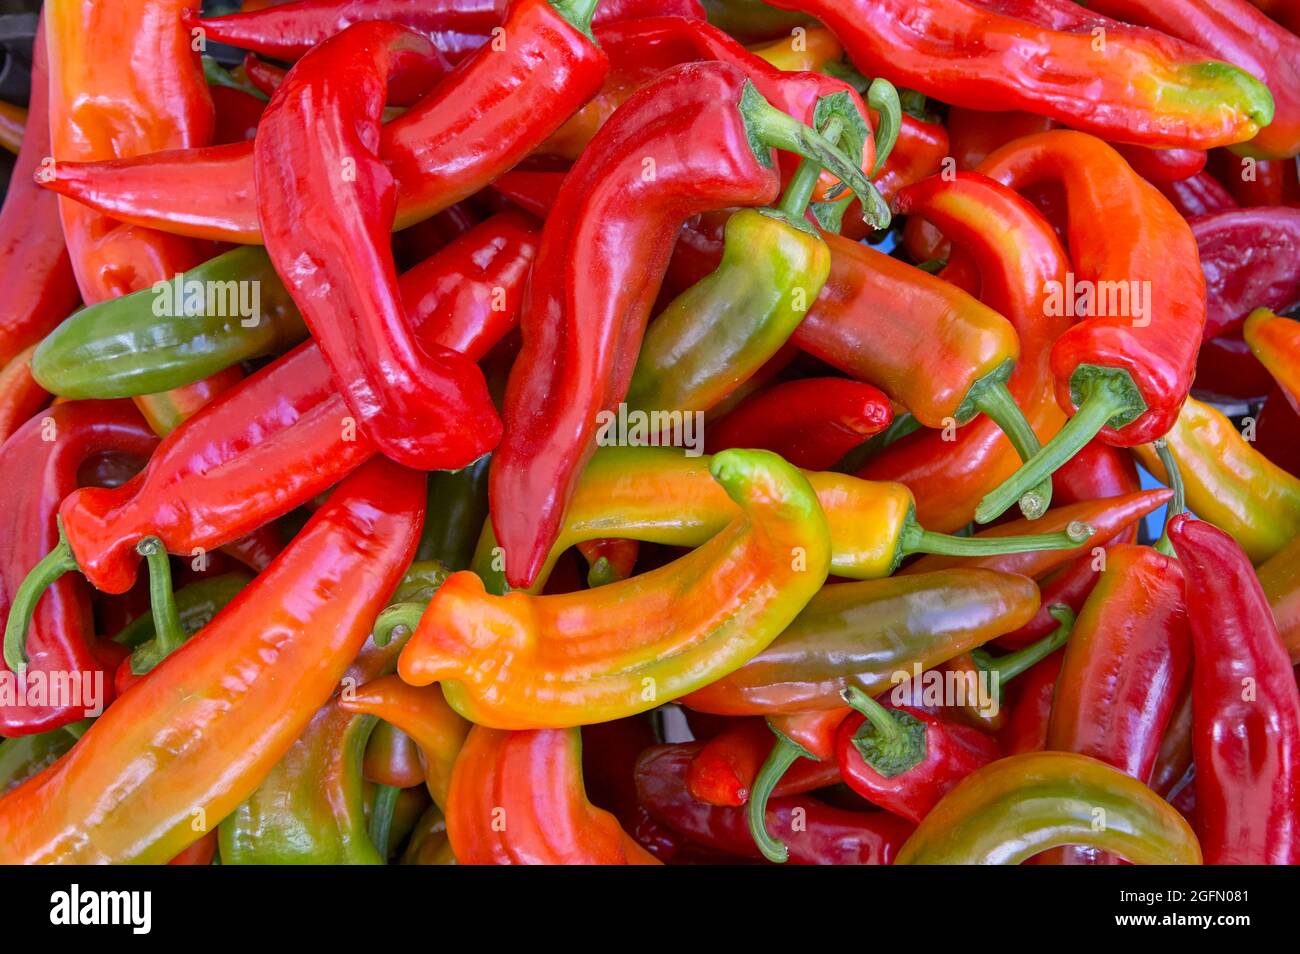 Display of Cristal French chili peppers known as the “Foie Gras” of the pepper world Stock Photo